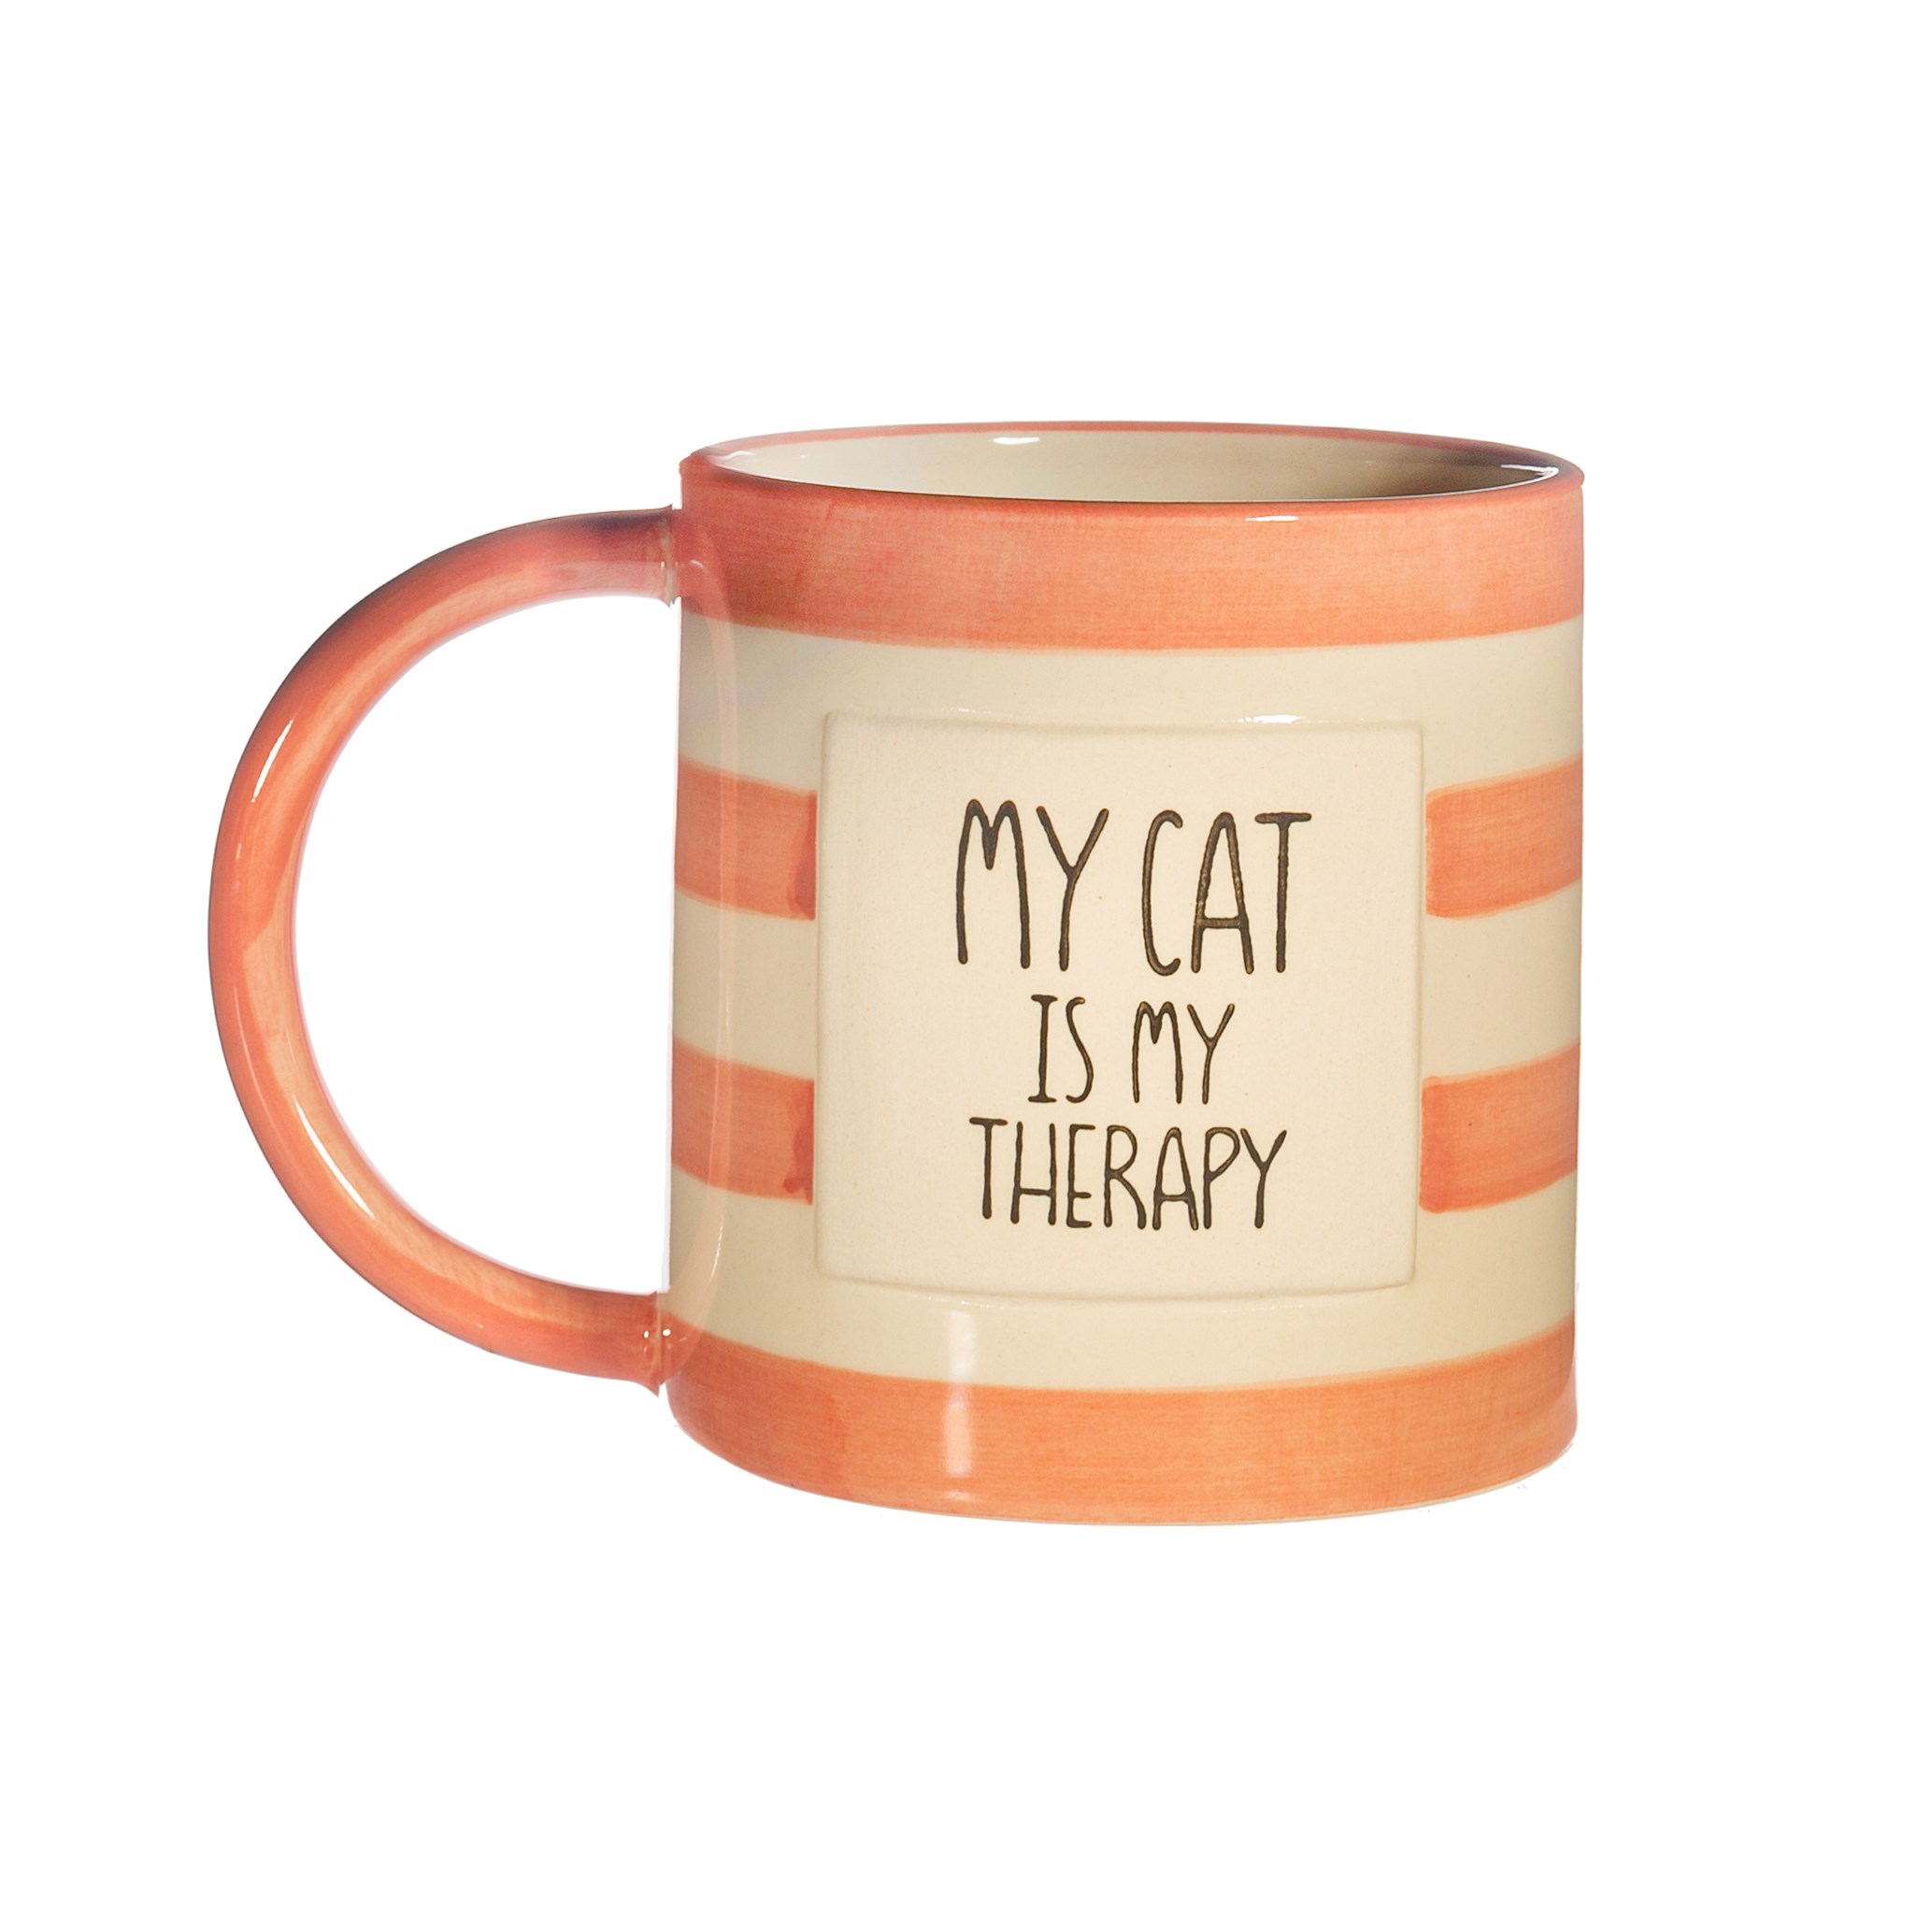 taza-therapy-cat-sass-and-belle-betina-shop_alz